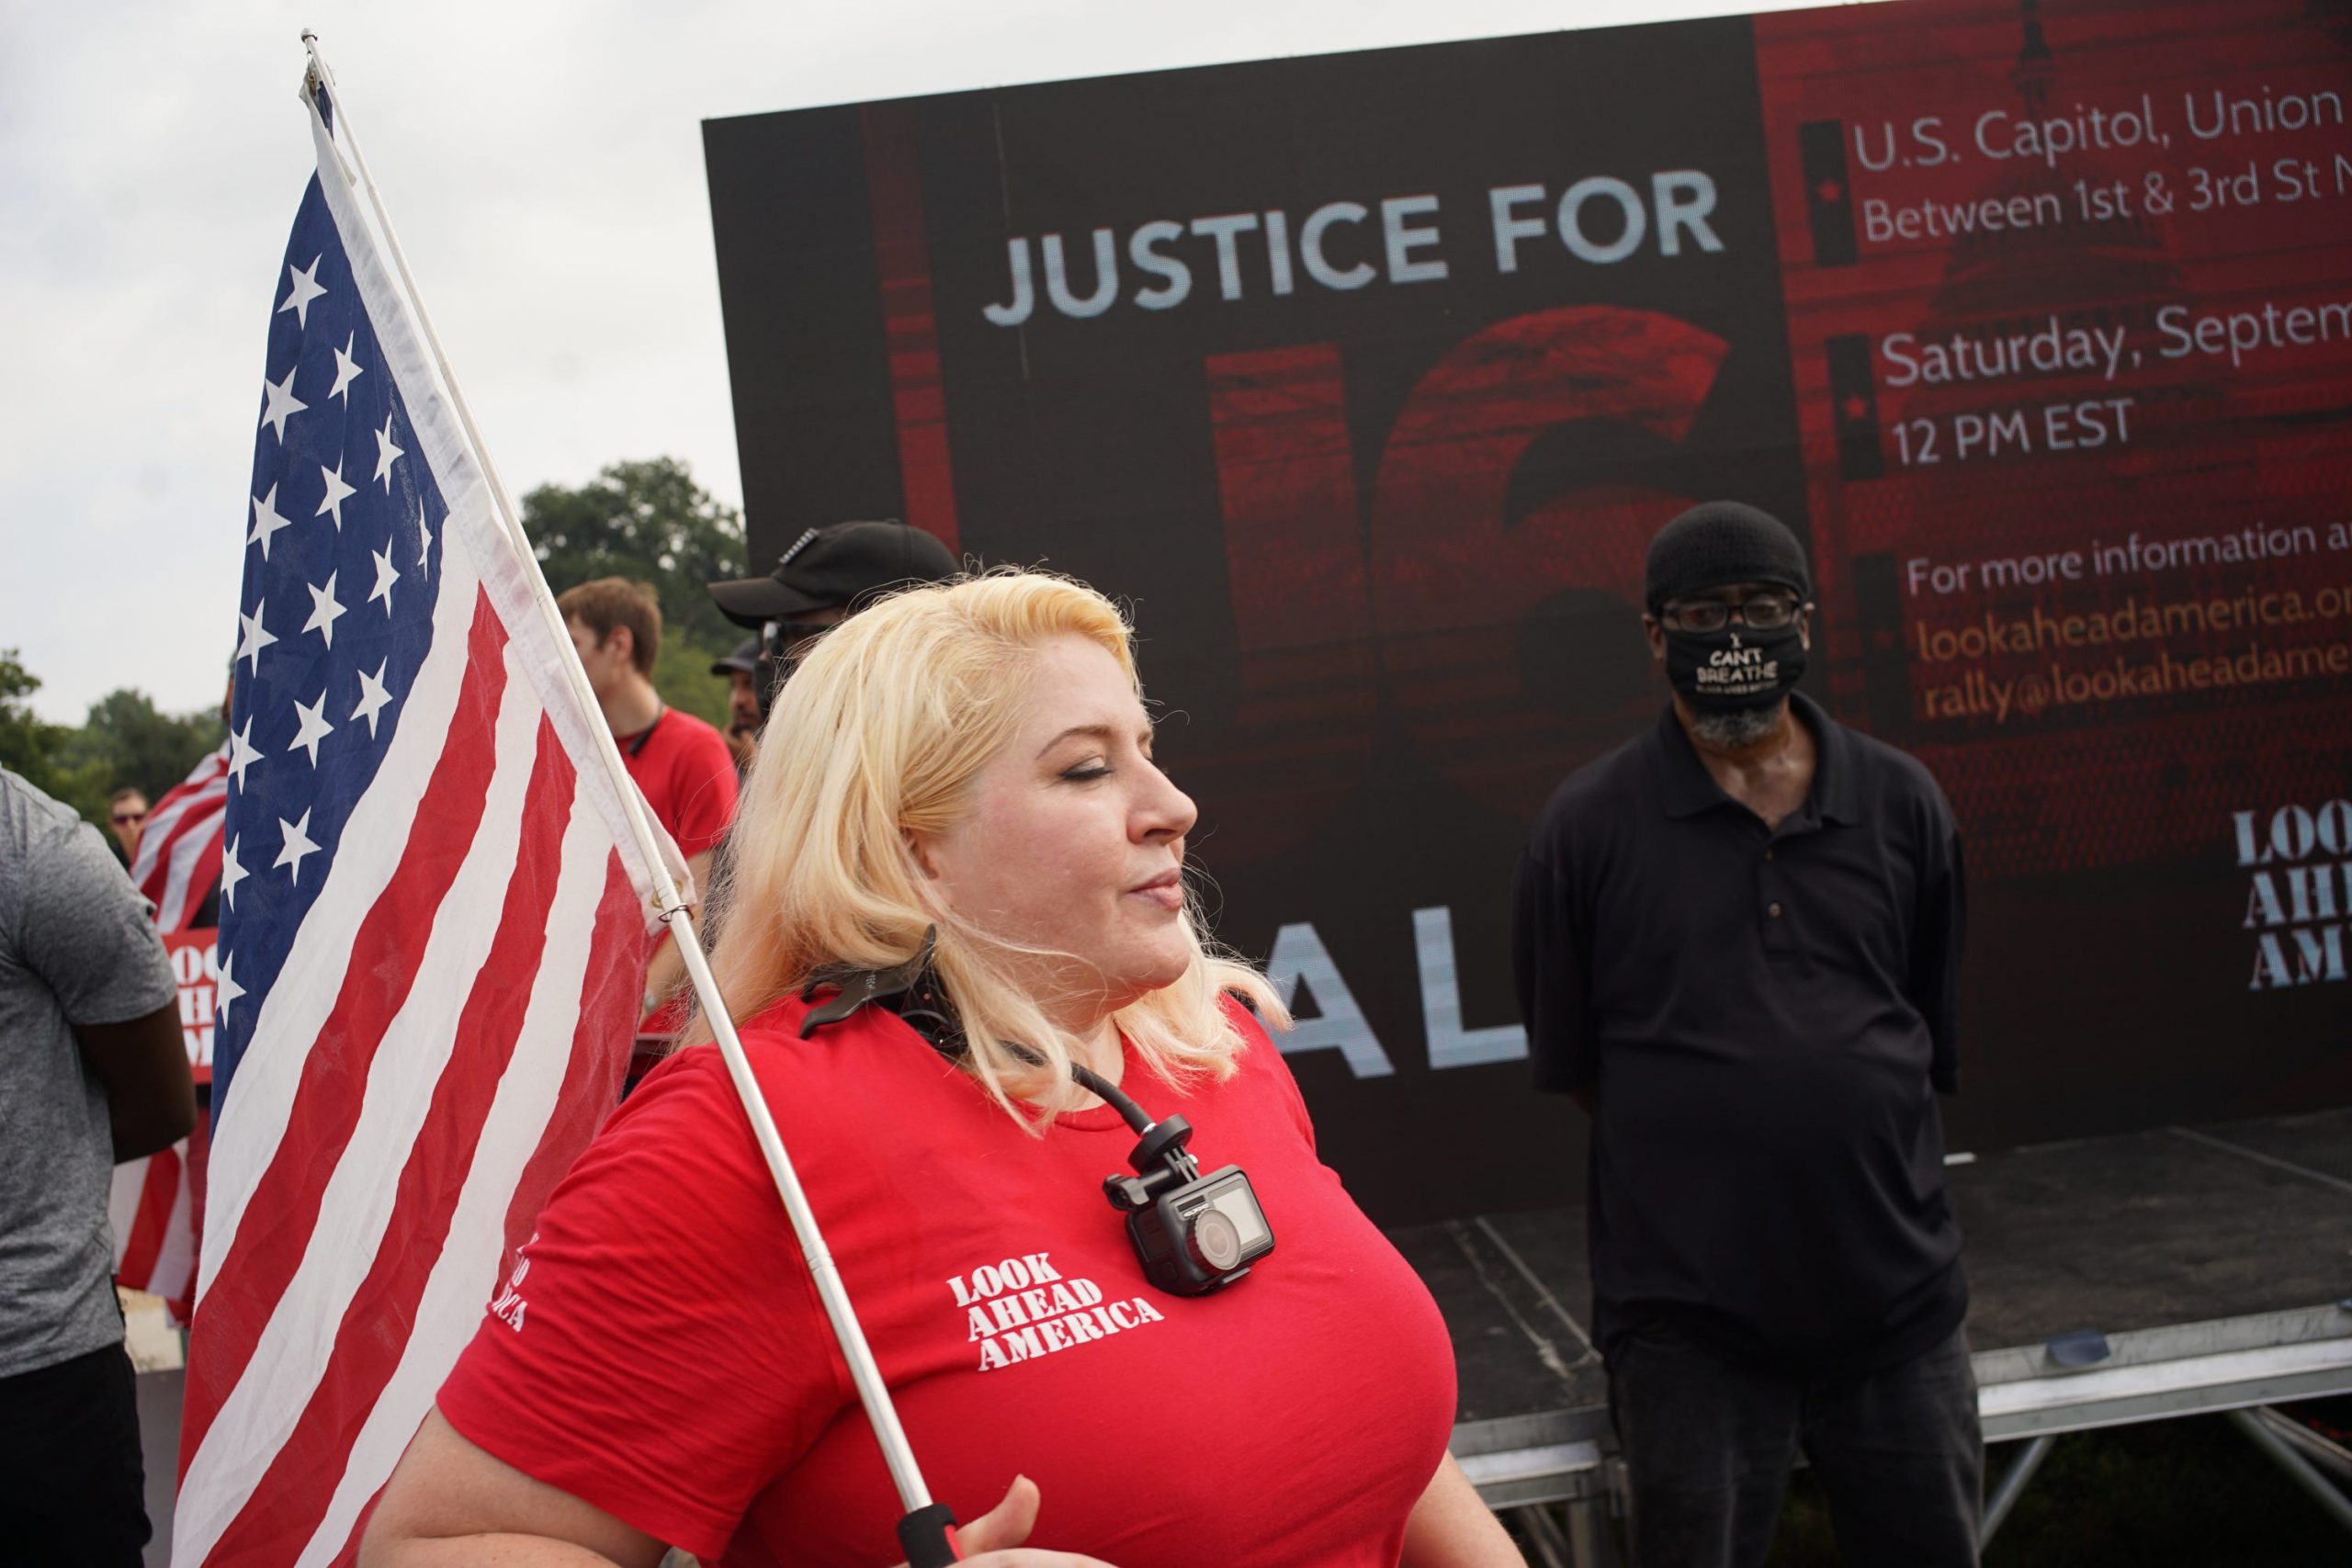 A protester holds an American flag as a security person stands behind her.